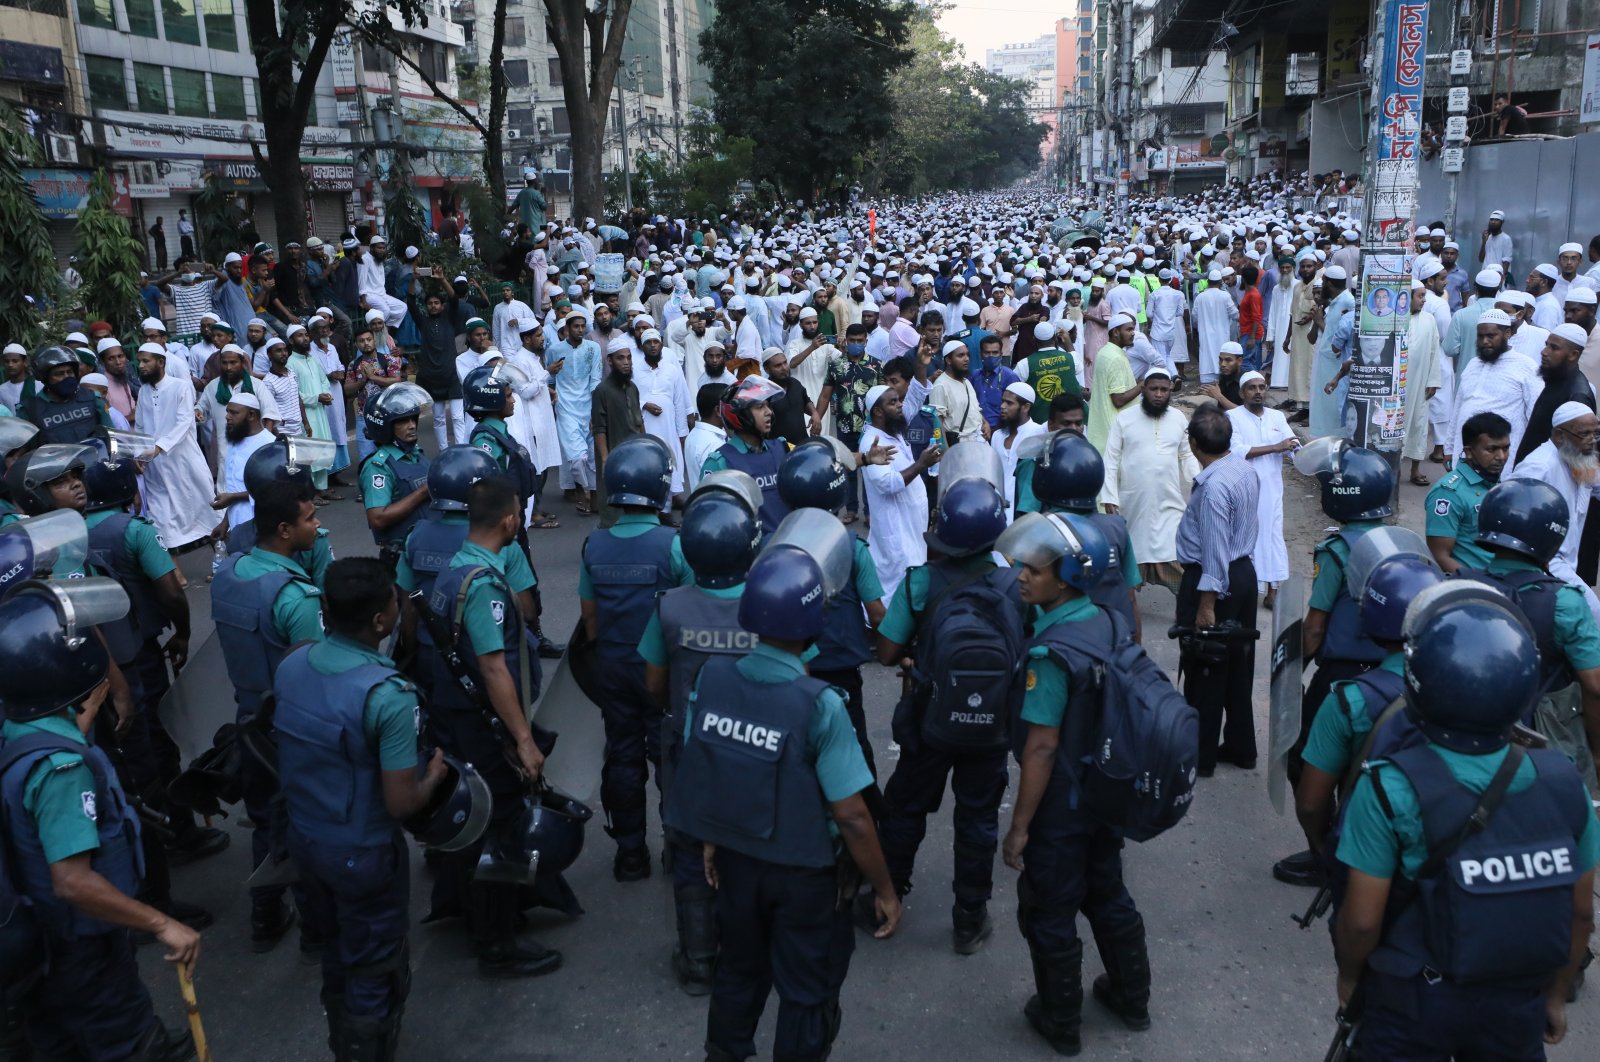 Protesters participate in a demonstration over an insult to Islam, outside the country’s main Baitul Mukarram Mosque in Dhaka, Bangladesh, Oct. 16, 2021. (AP Photo)